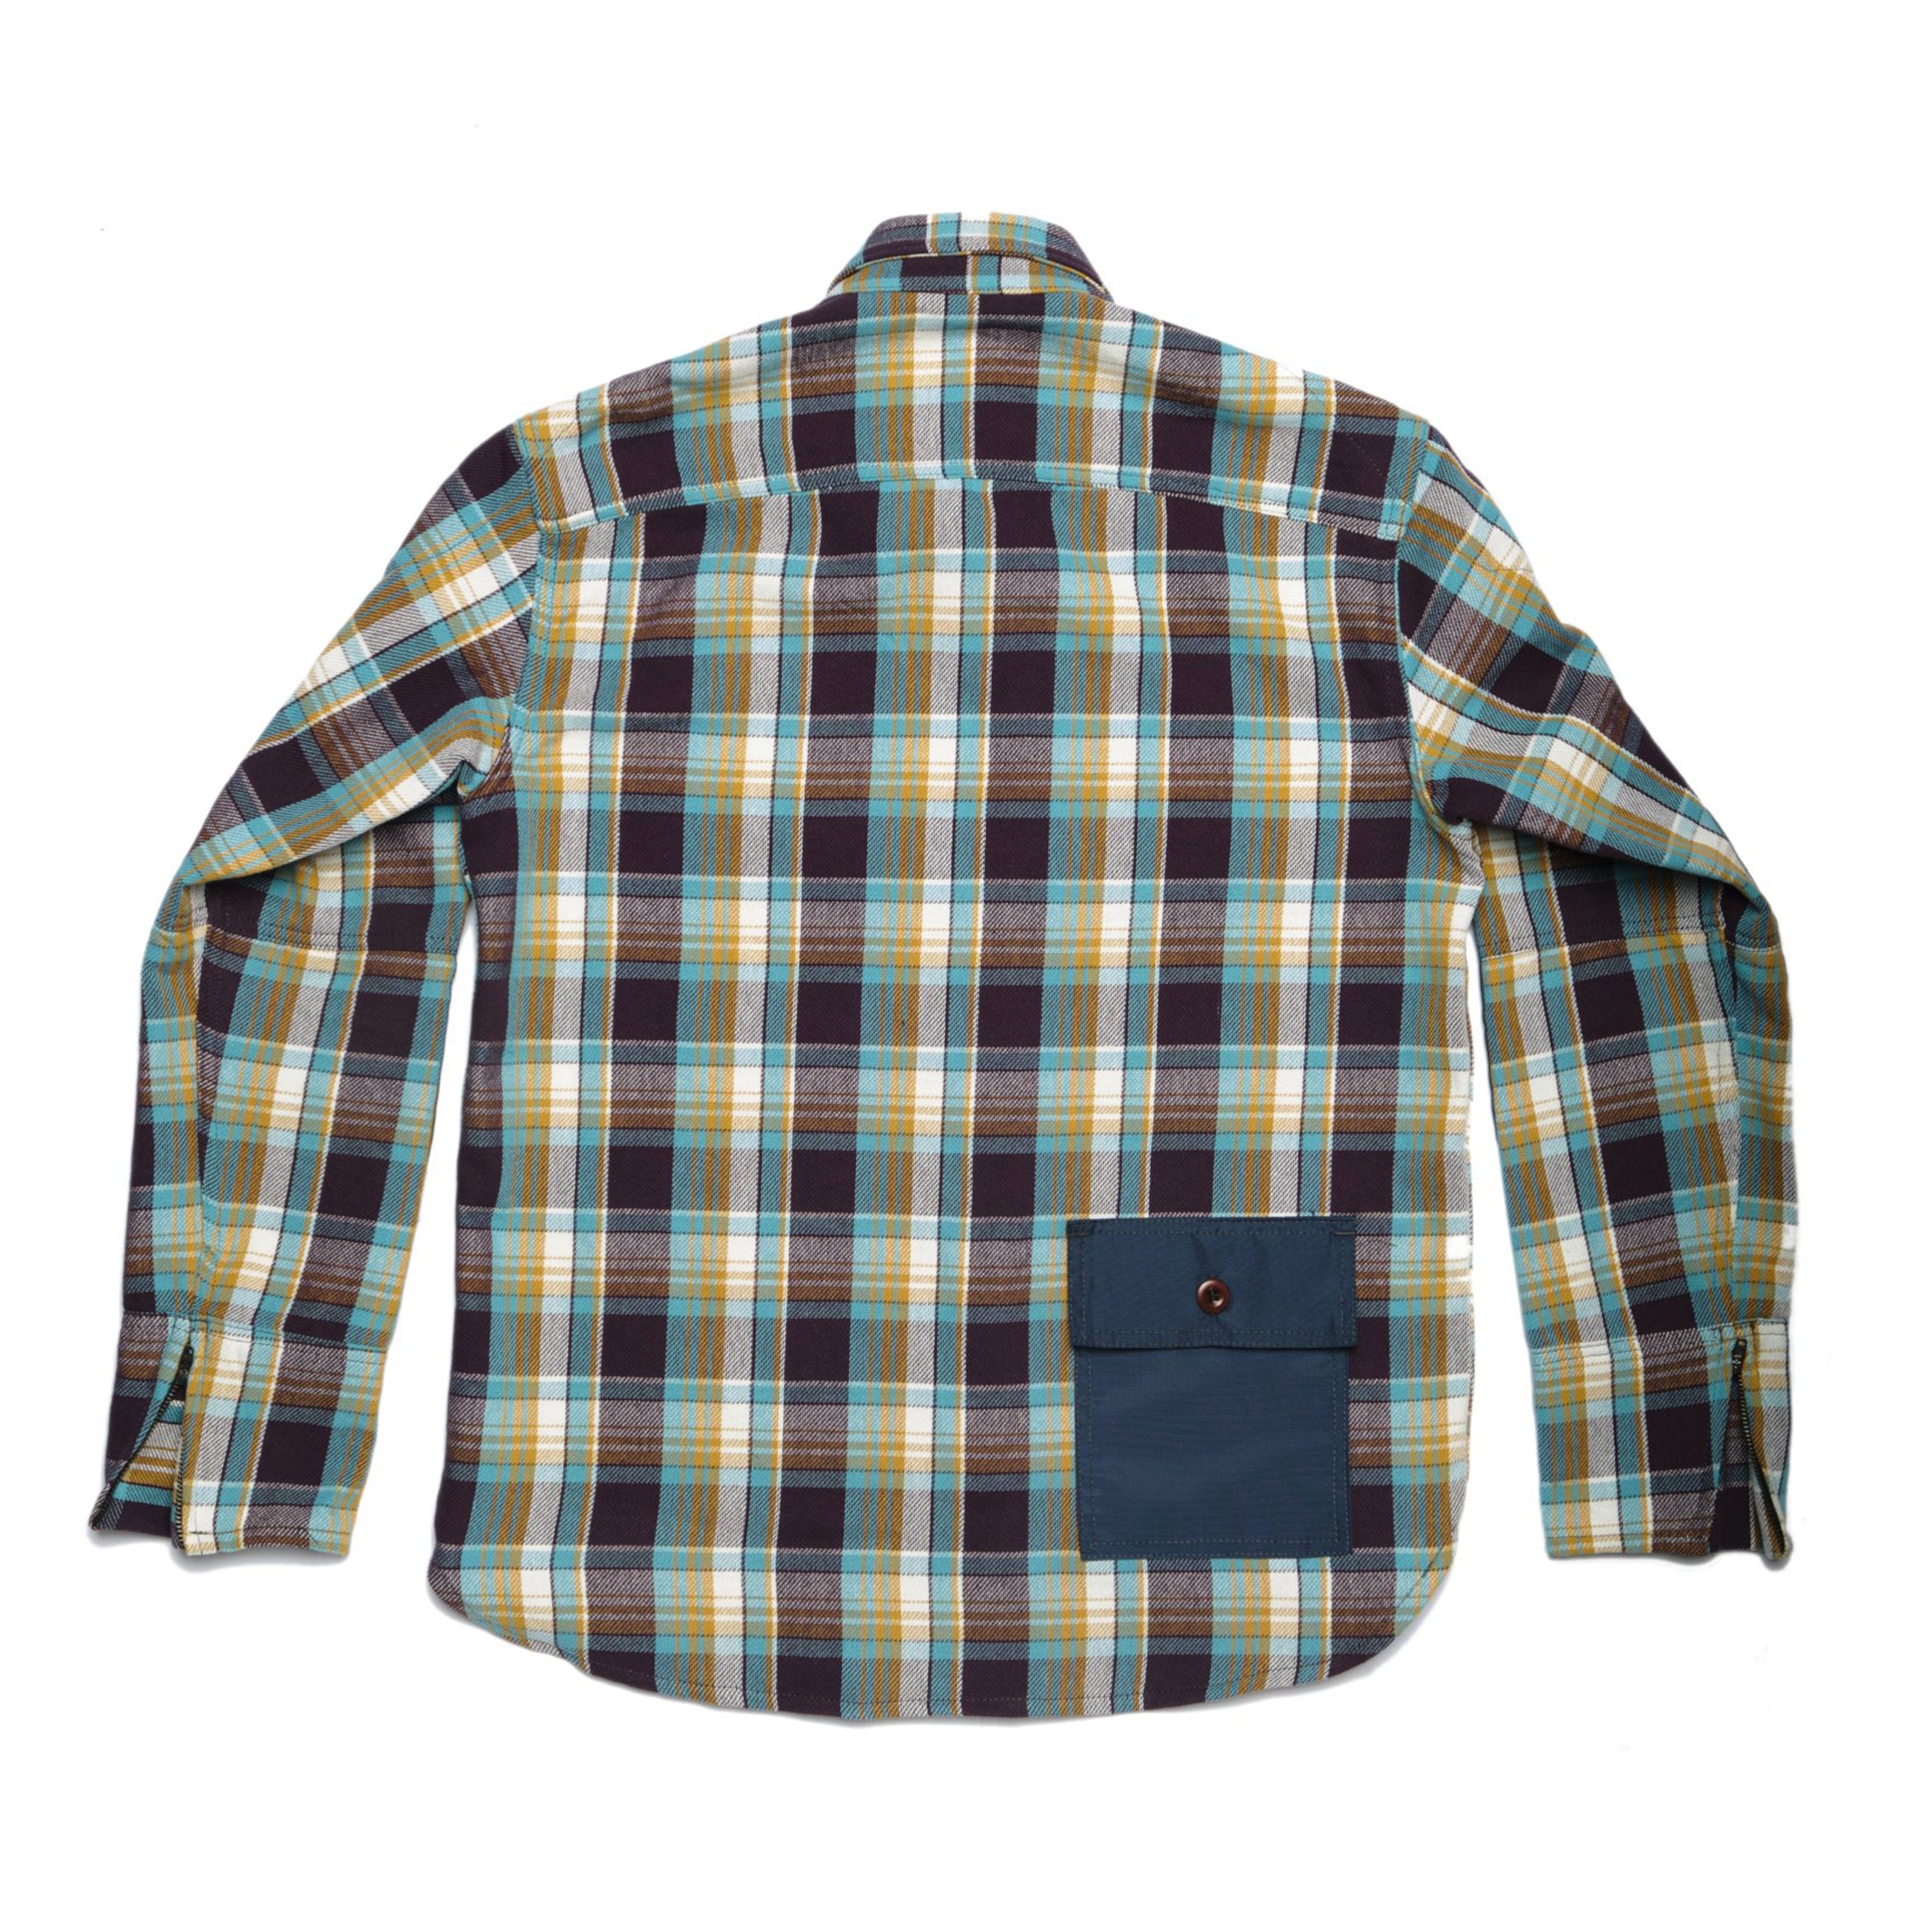 THE MERCER Riding Shirt -Blue Plaid Flannel - Limited Edition